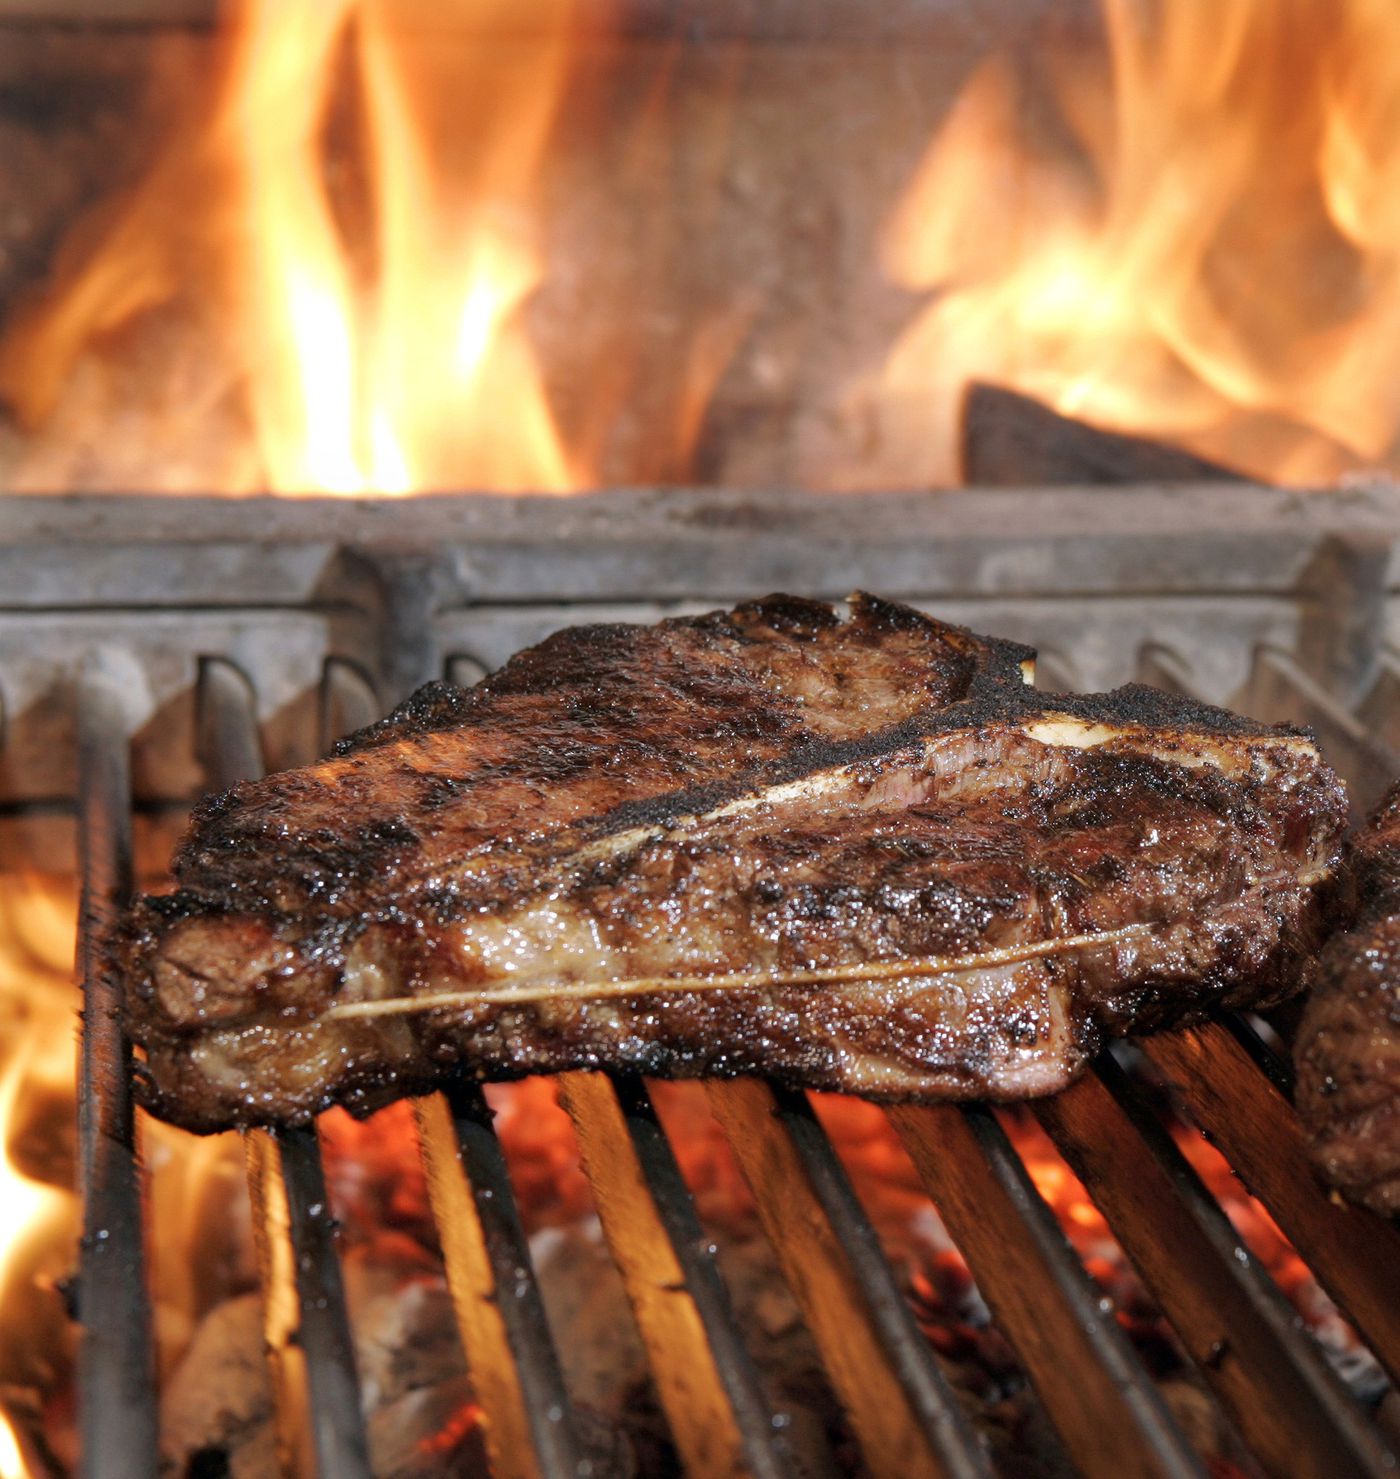 Why grilled meat tastes so good, according to science